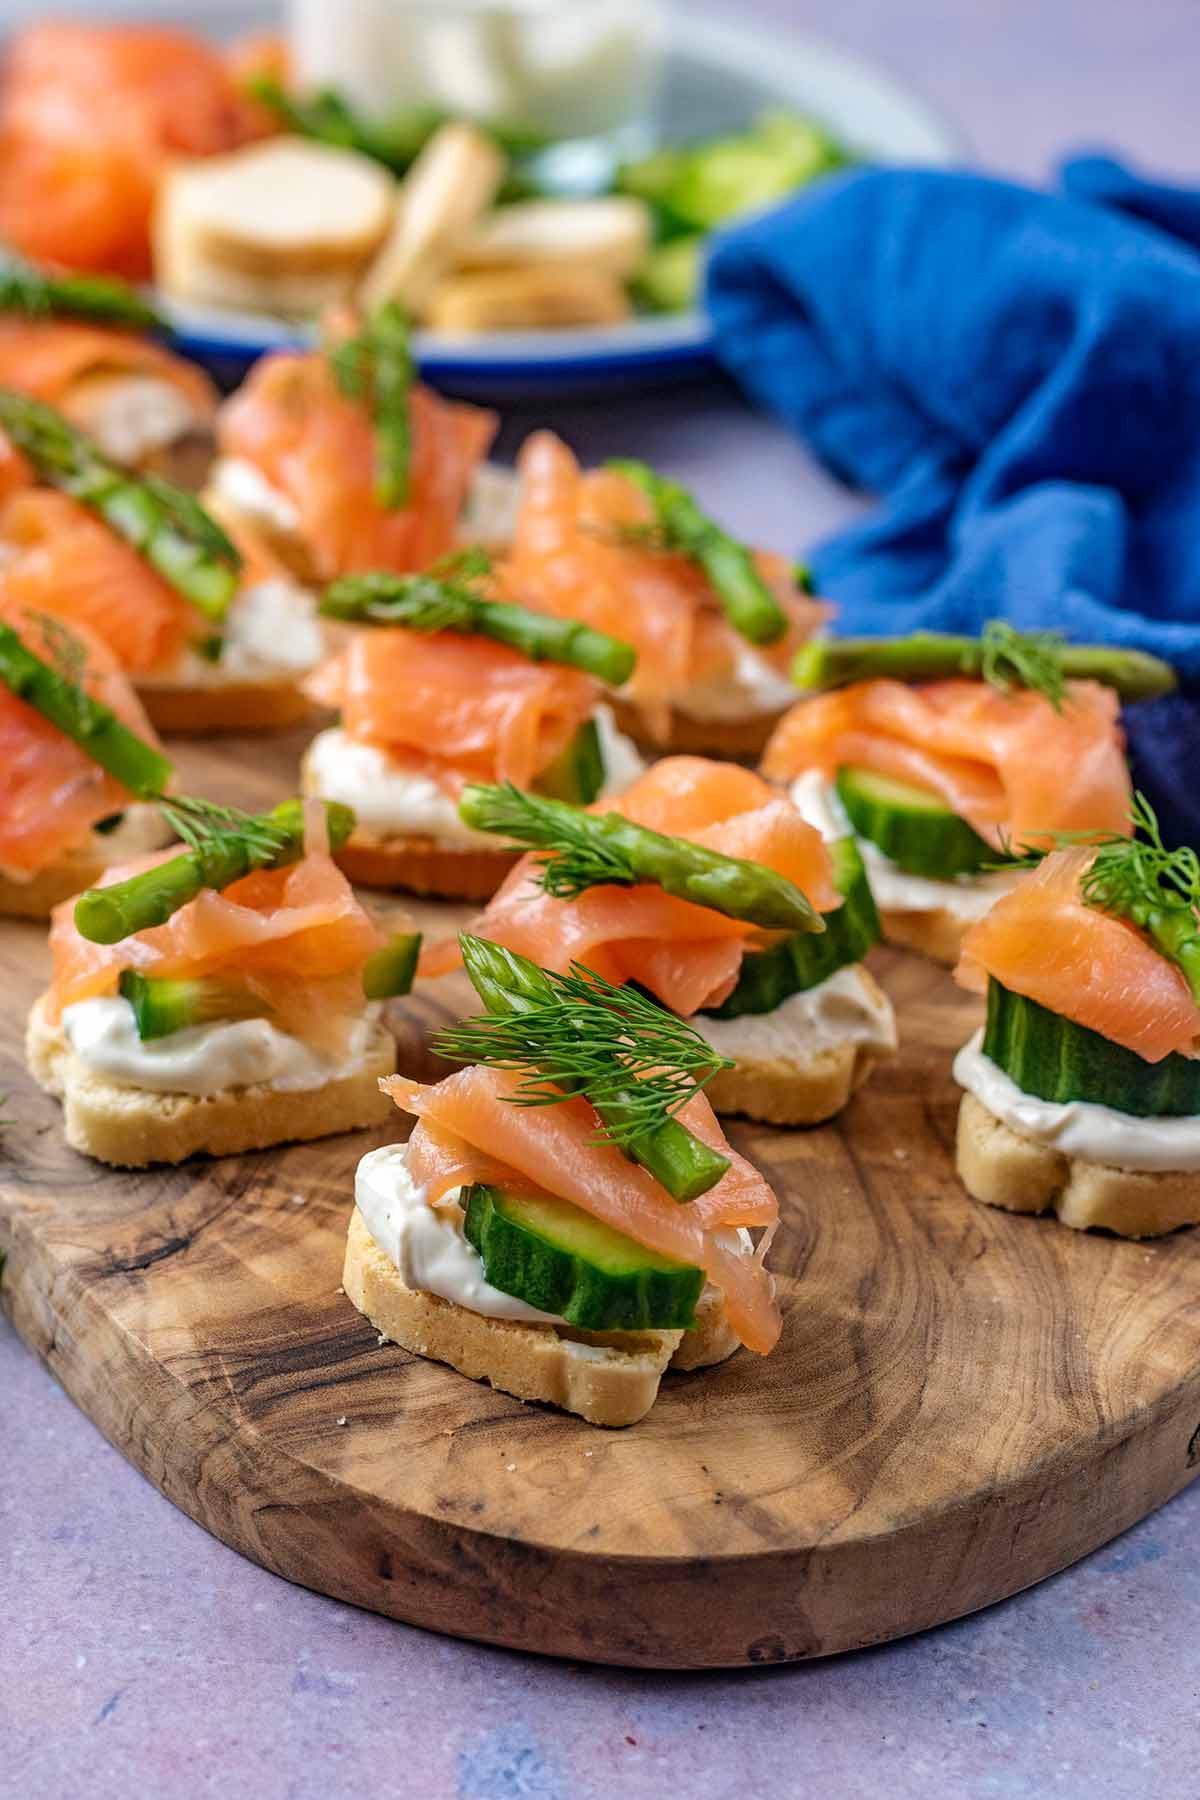 Salmon canapes on a wooden board in front of a blue towel.